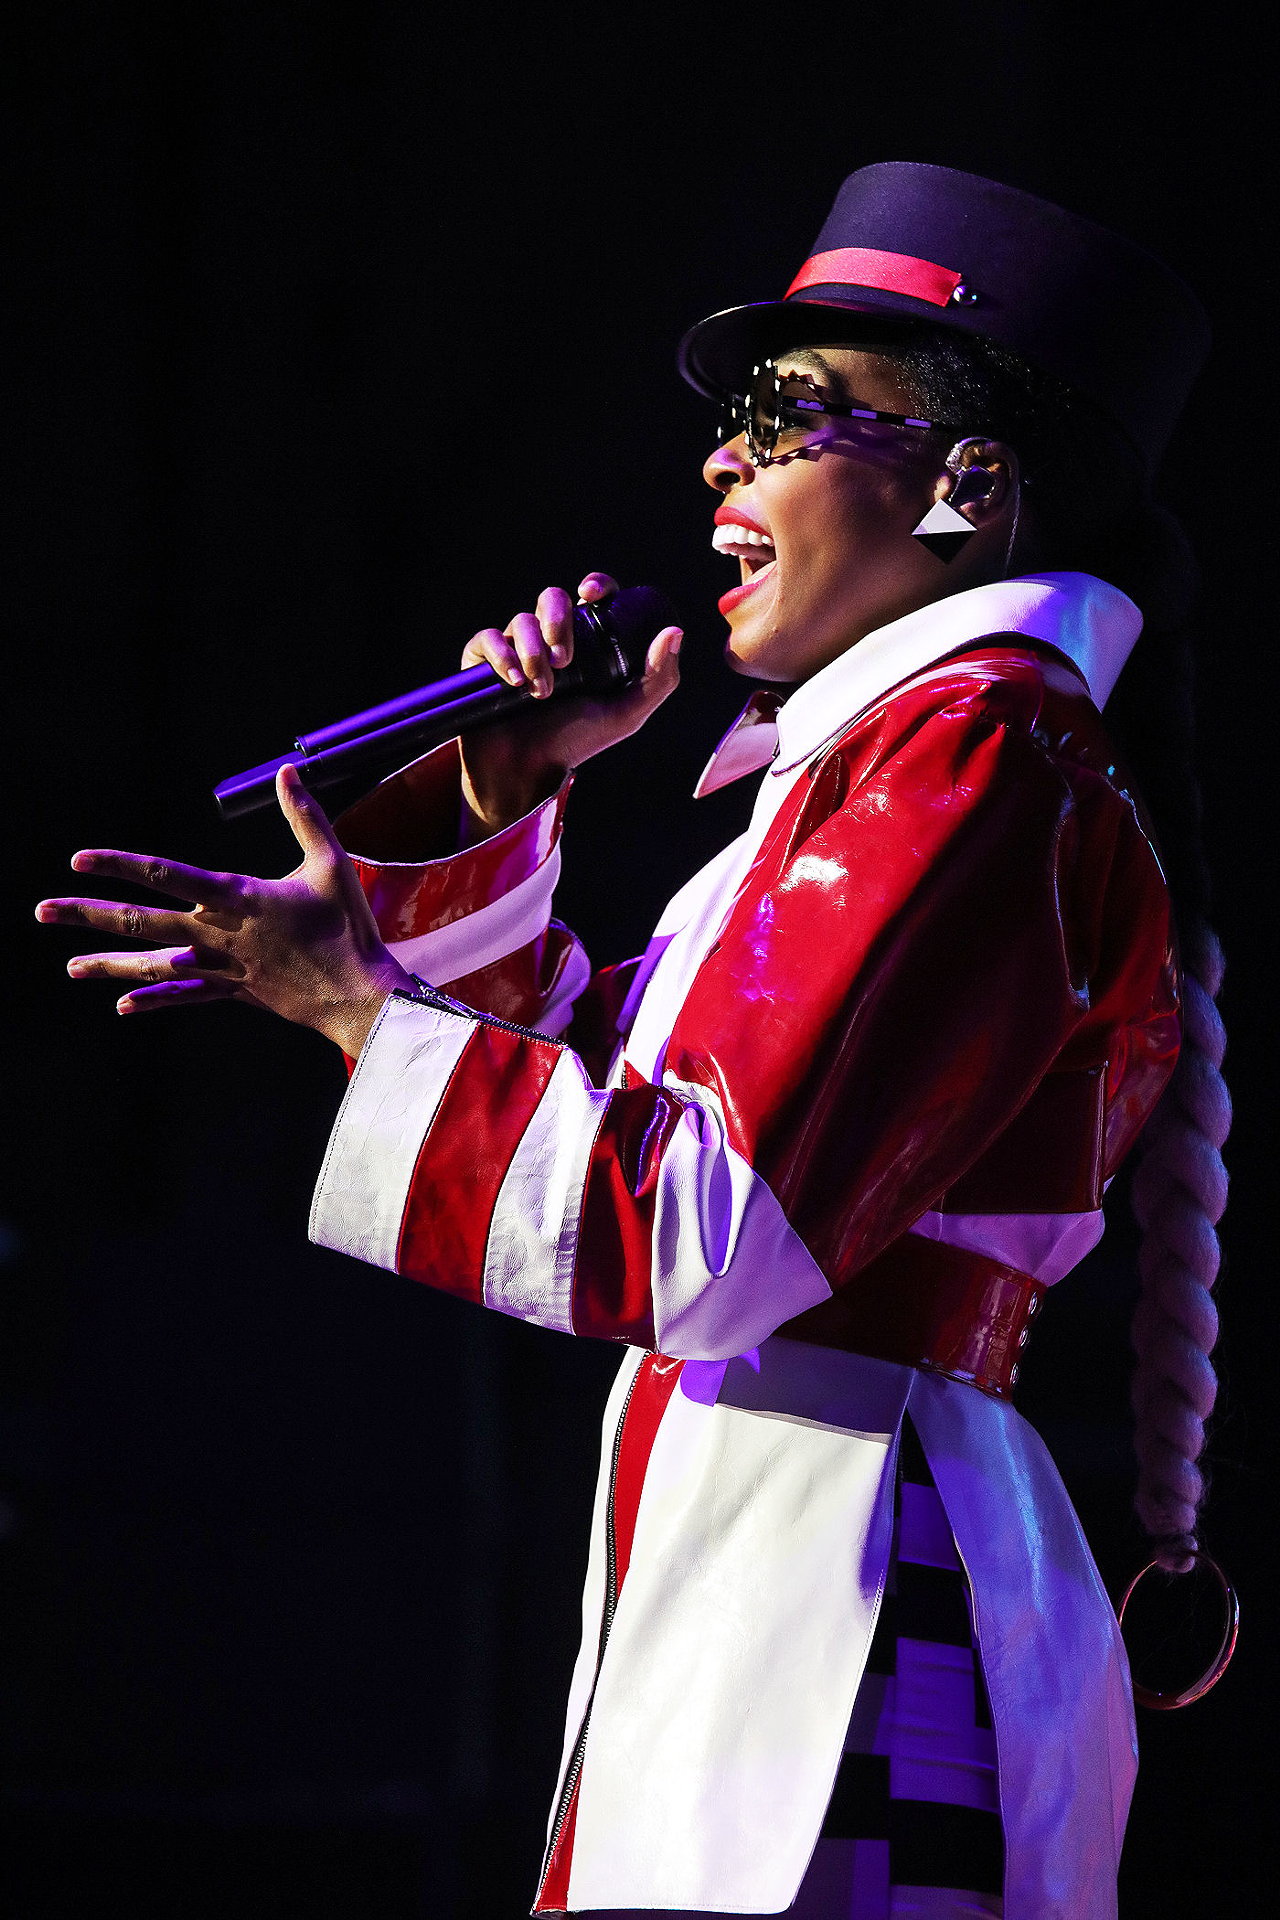 PHOTOS: Janelle Monae Performs at Downtown Cincinnati's Taft Theater During Her Dirty Computer Tour